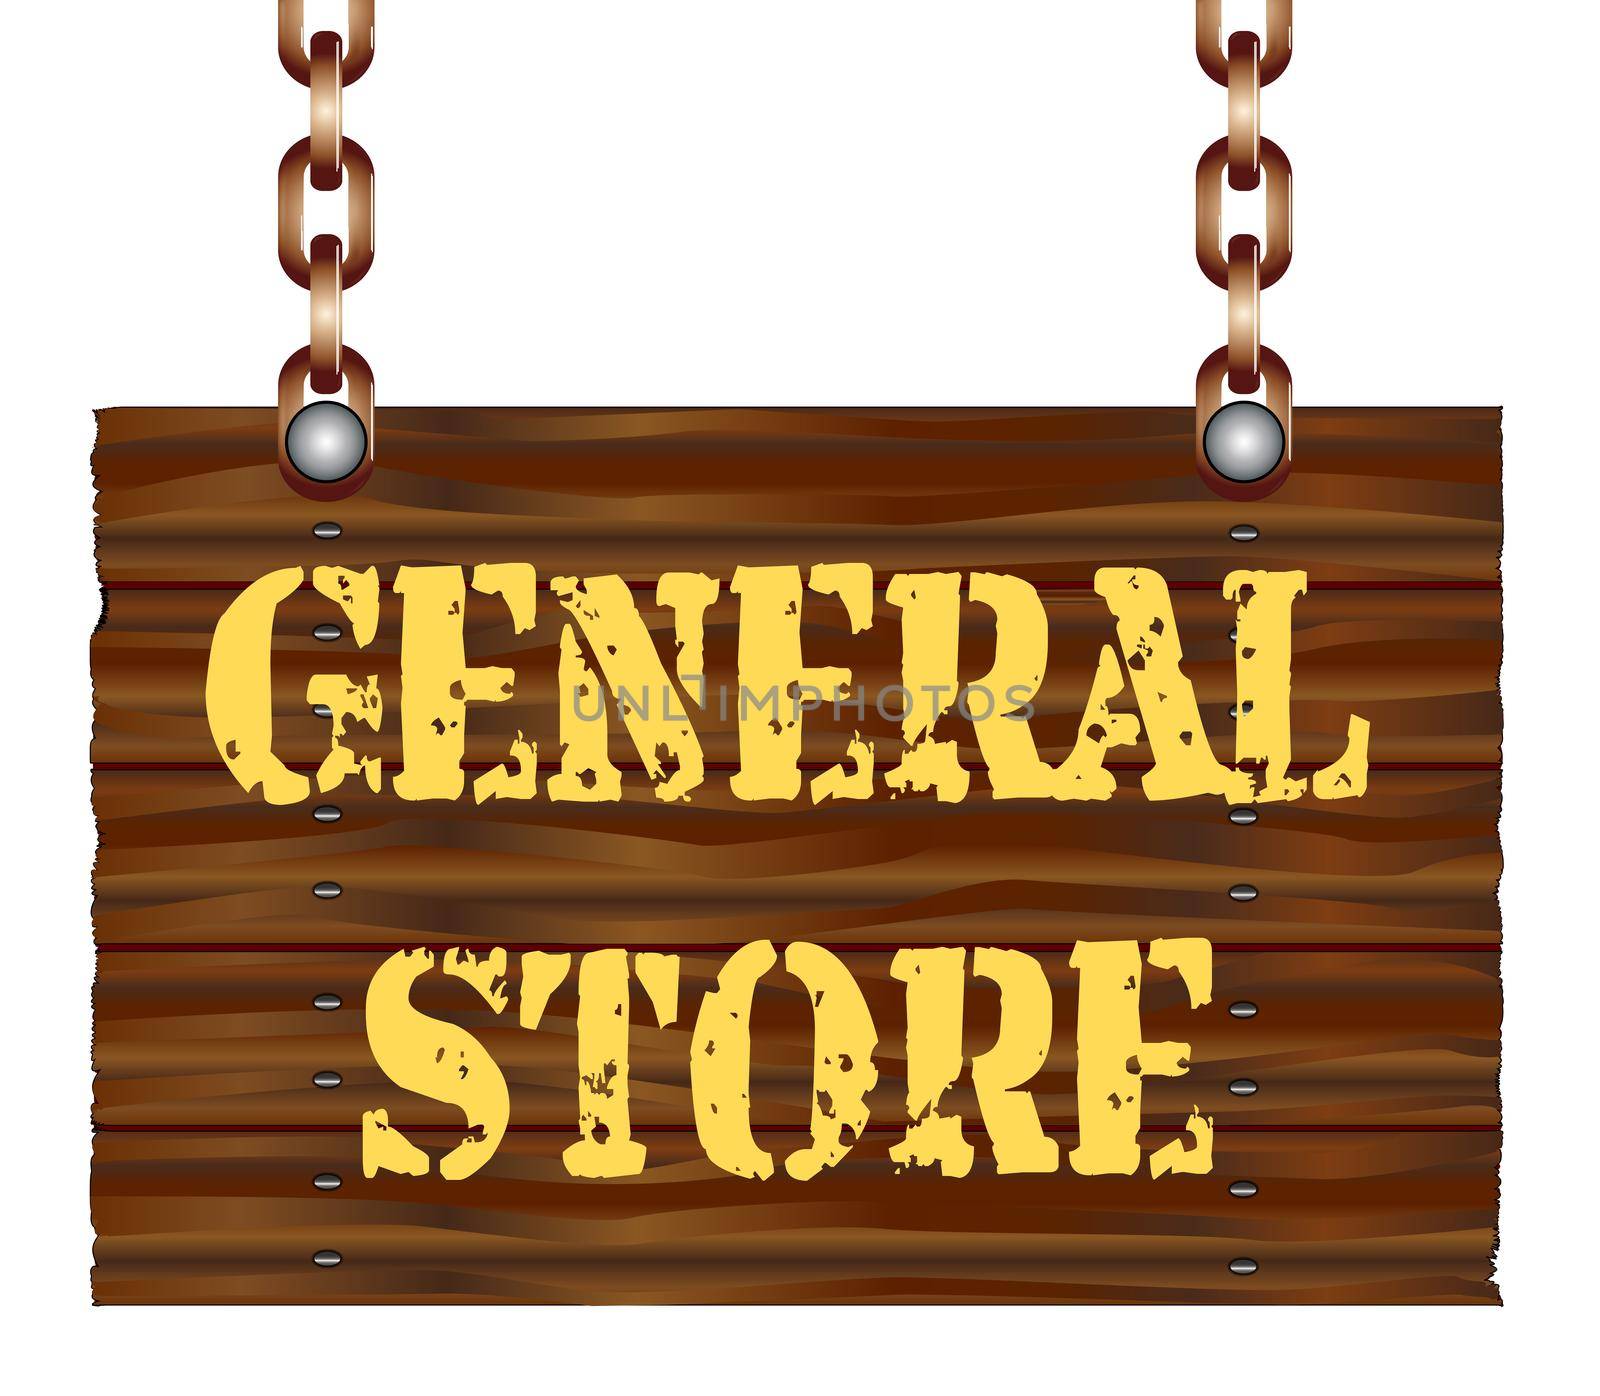 A hanging wooden general store sign isolated against a white background.